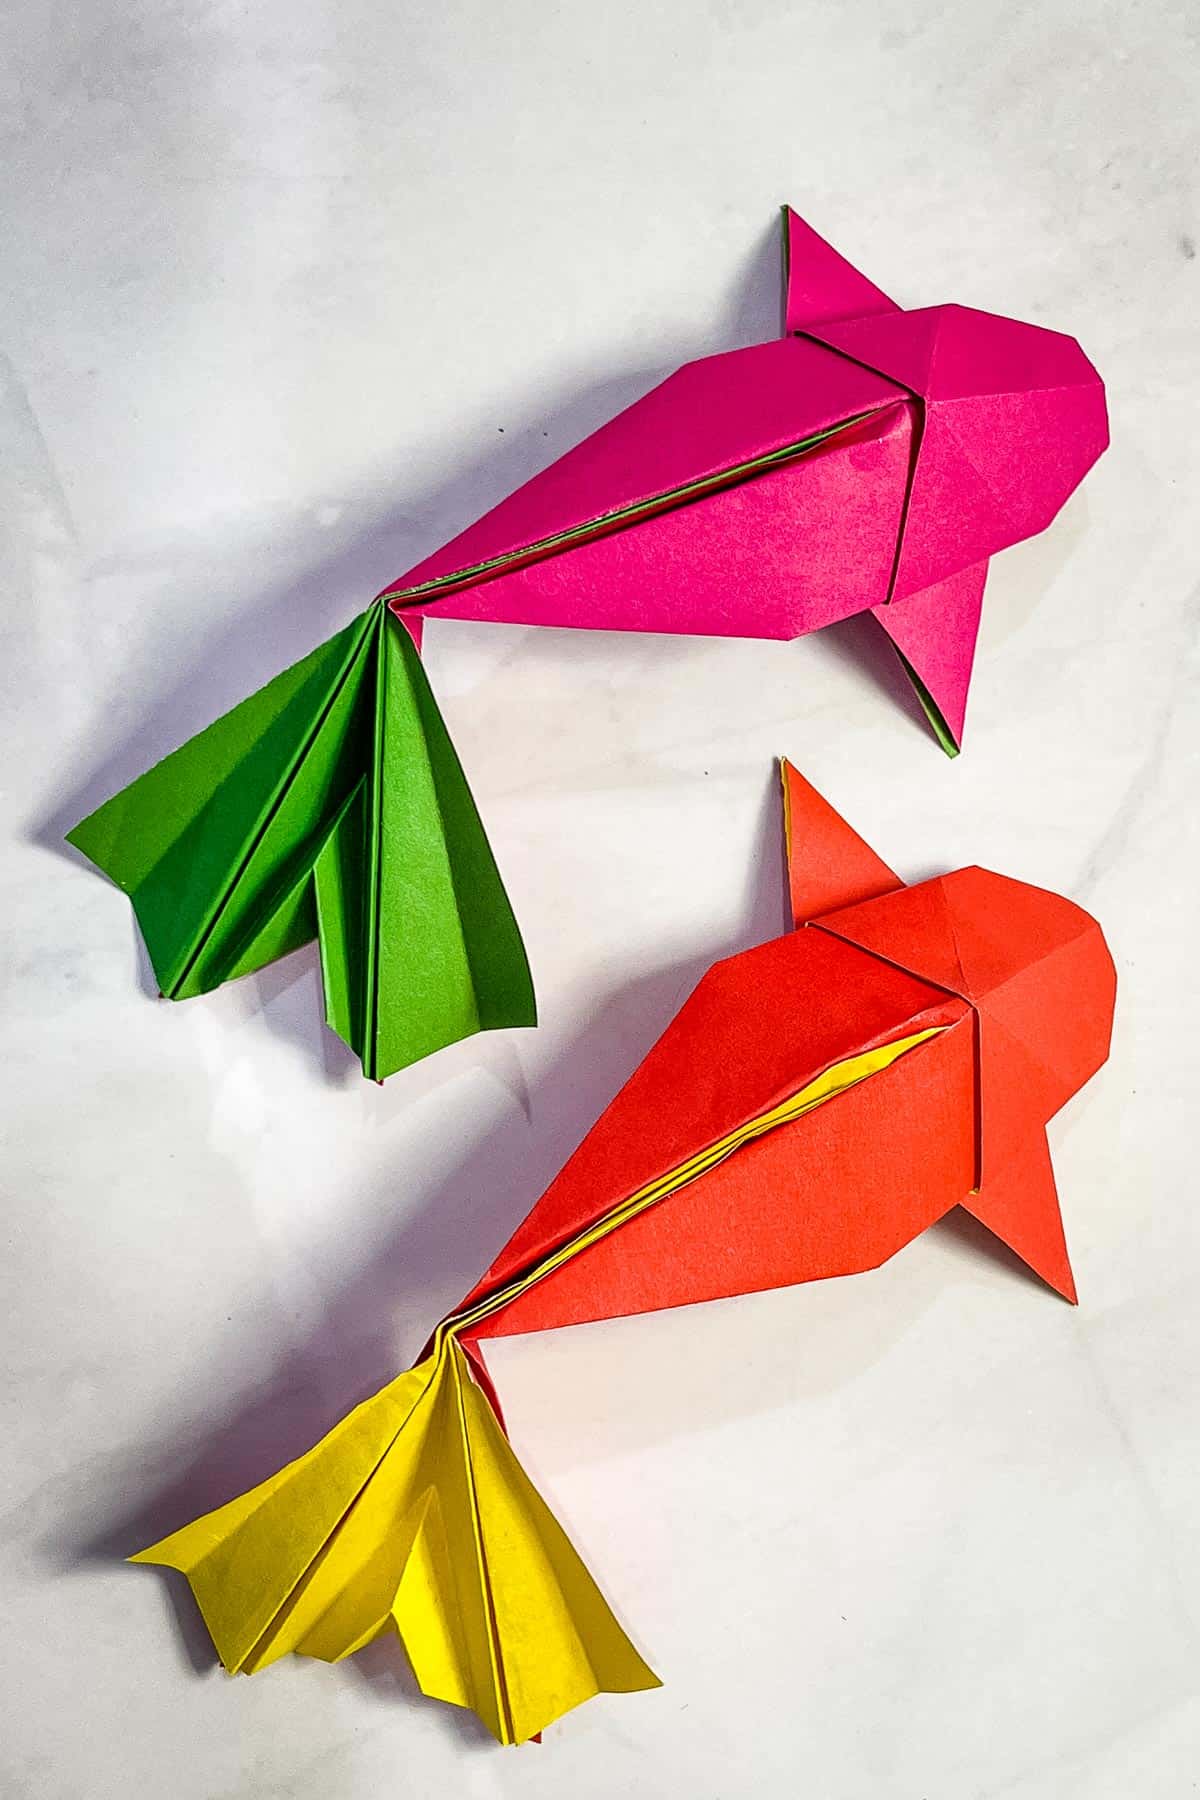 Paper fish in pink, green, red and yellow.